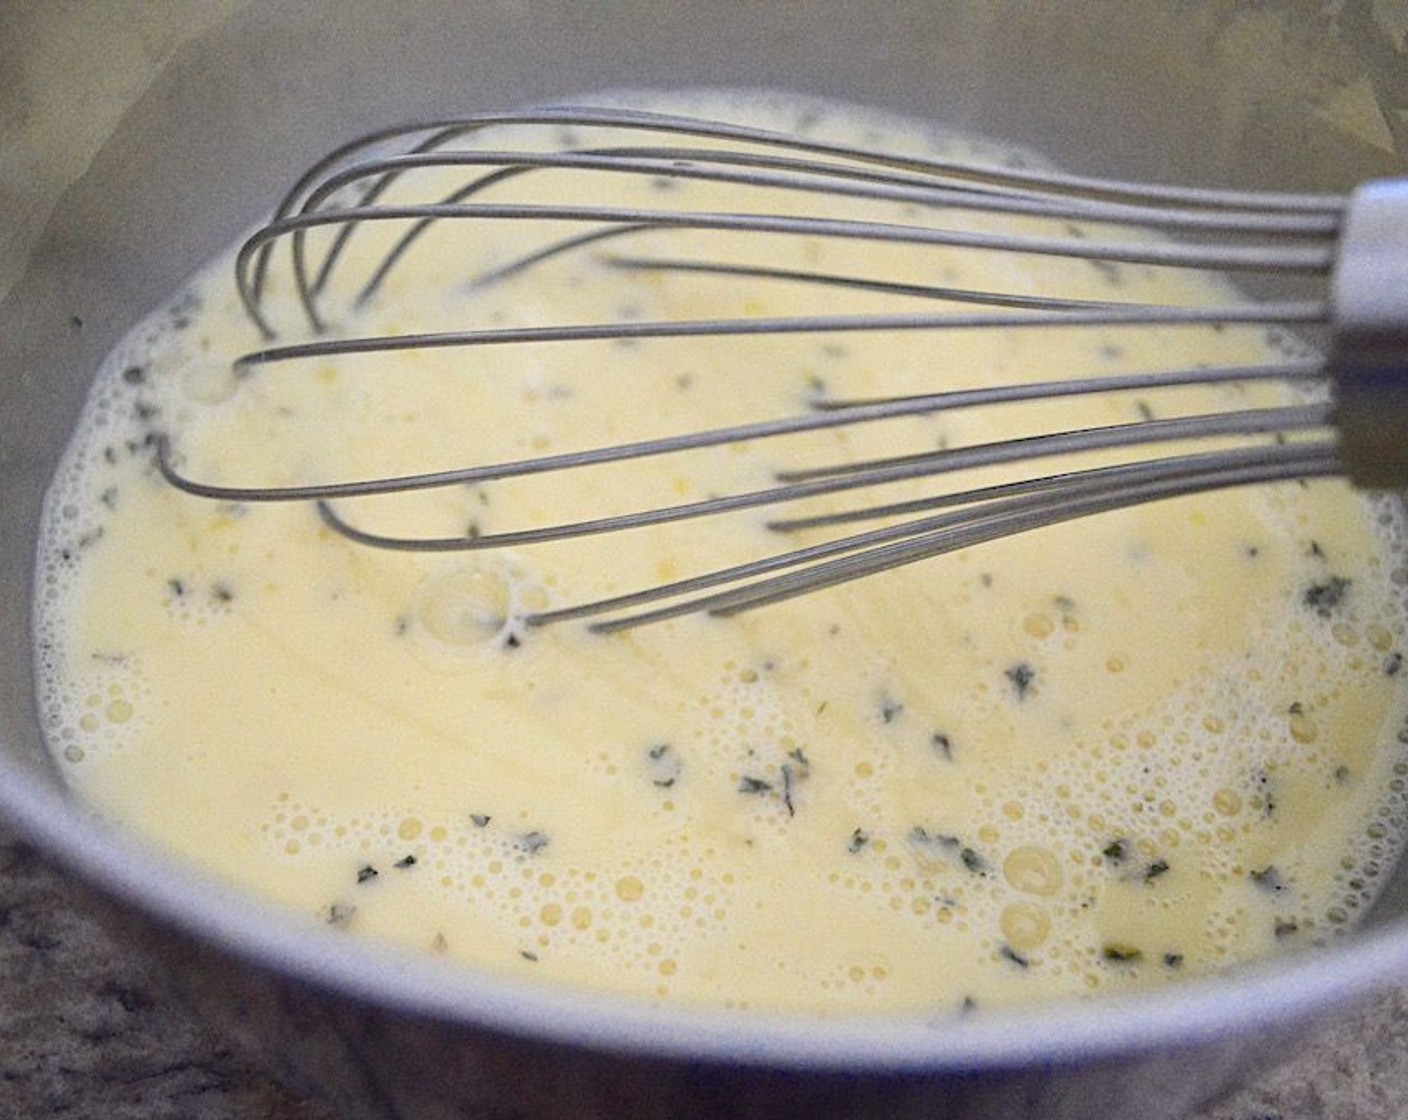 step 6 In a mixing bowl, whisk together the Eggs (6), Milk (1/2 cup), Salt (1 pinch), Ground Black Pepper (1 pinch), and Dried Parsley (1 pinch). Whisk it until you see bubbles so you know that some air is in the eggs.